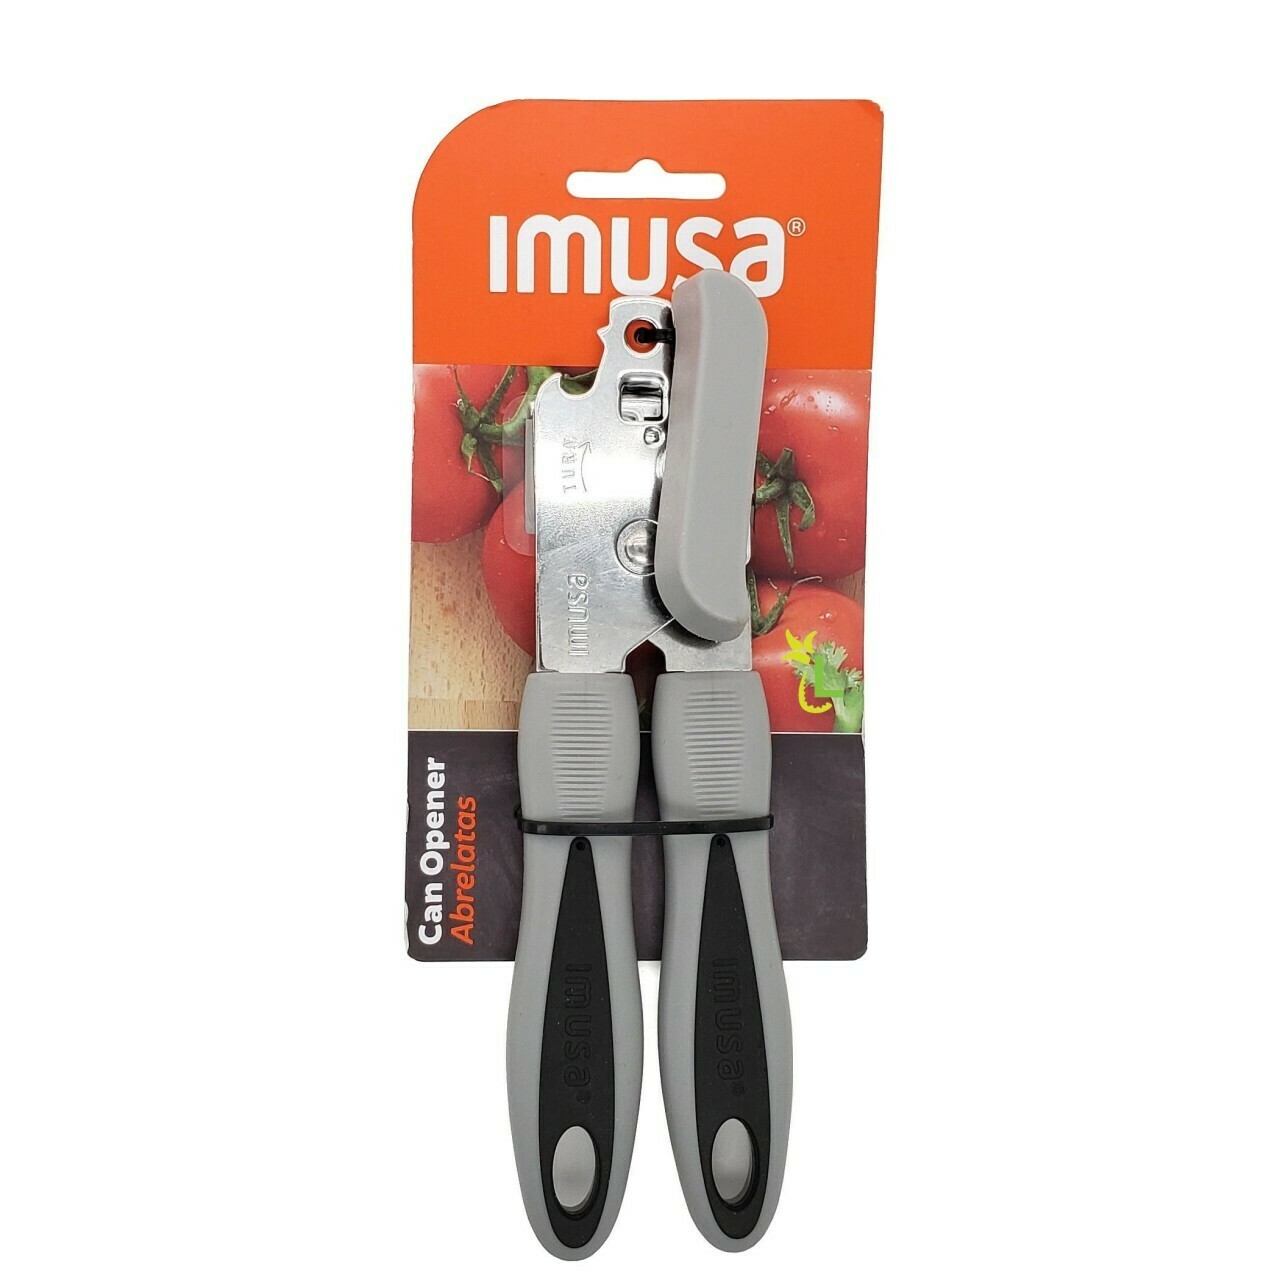 IMUSA CAN OPENER